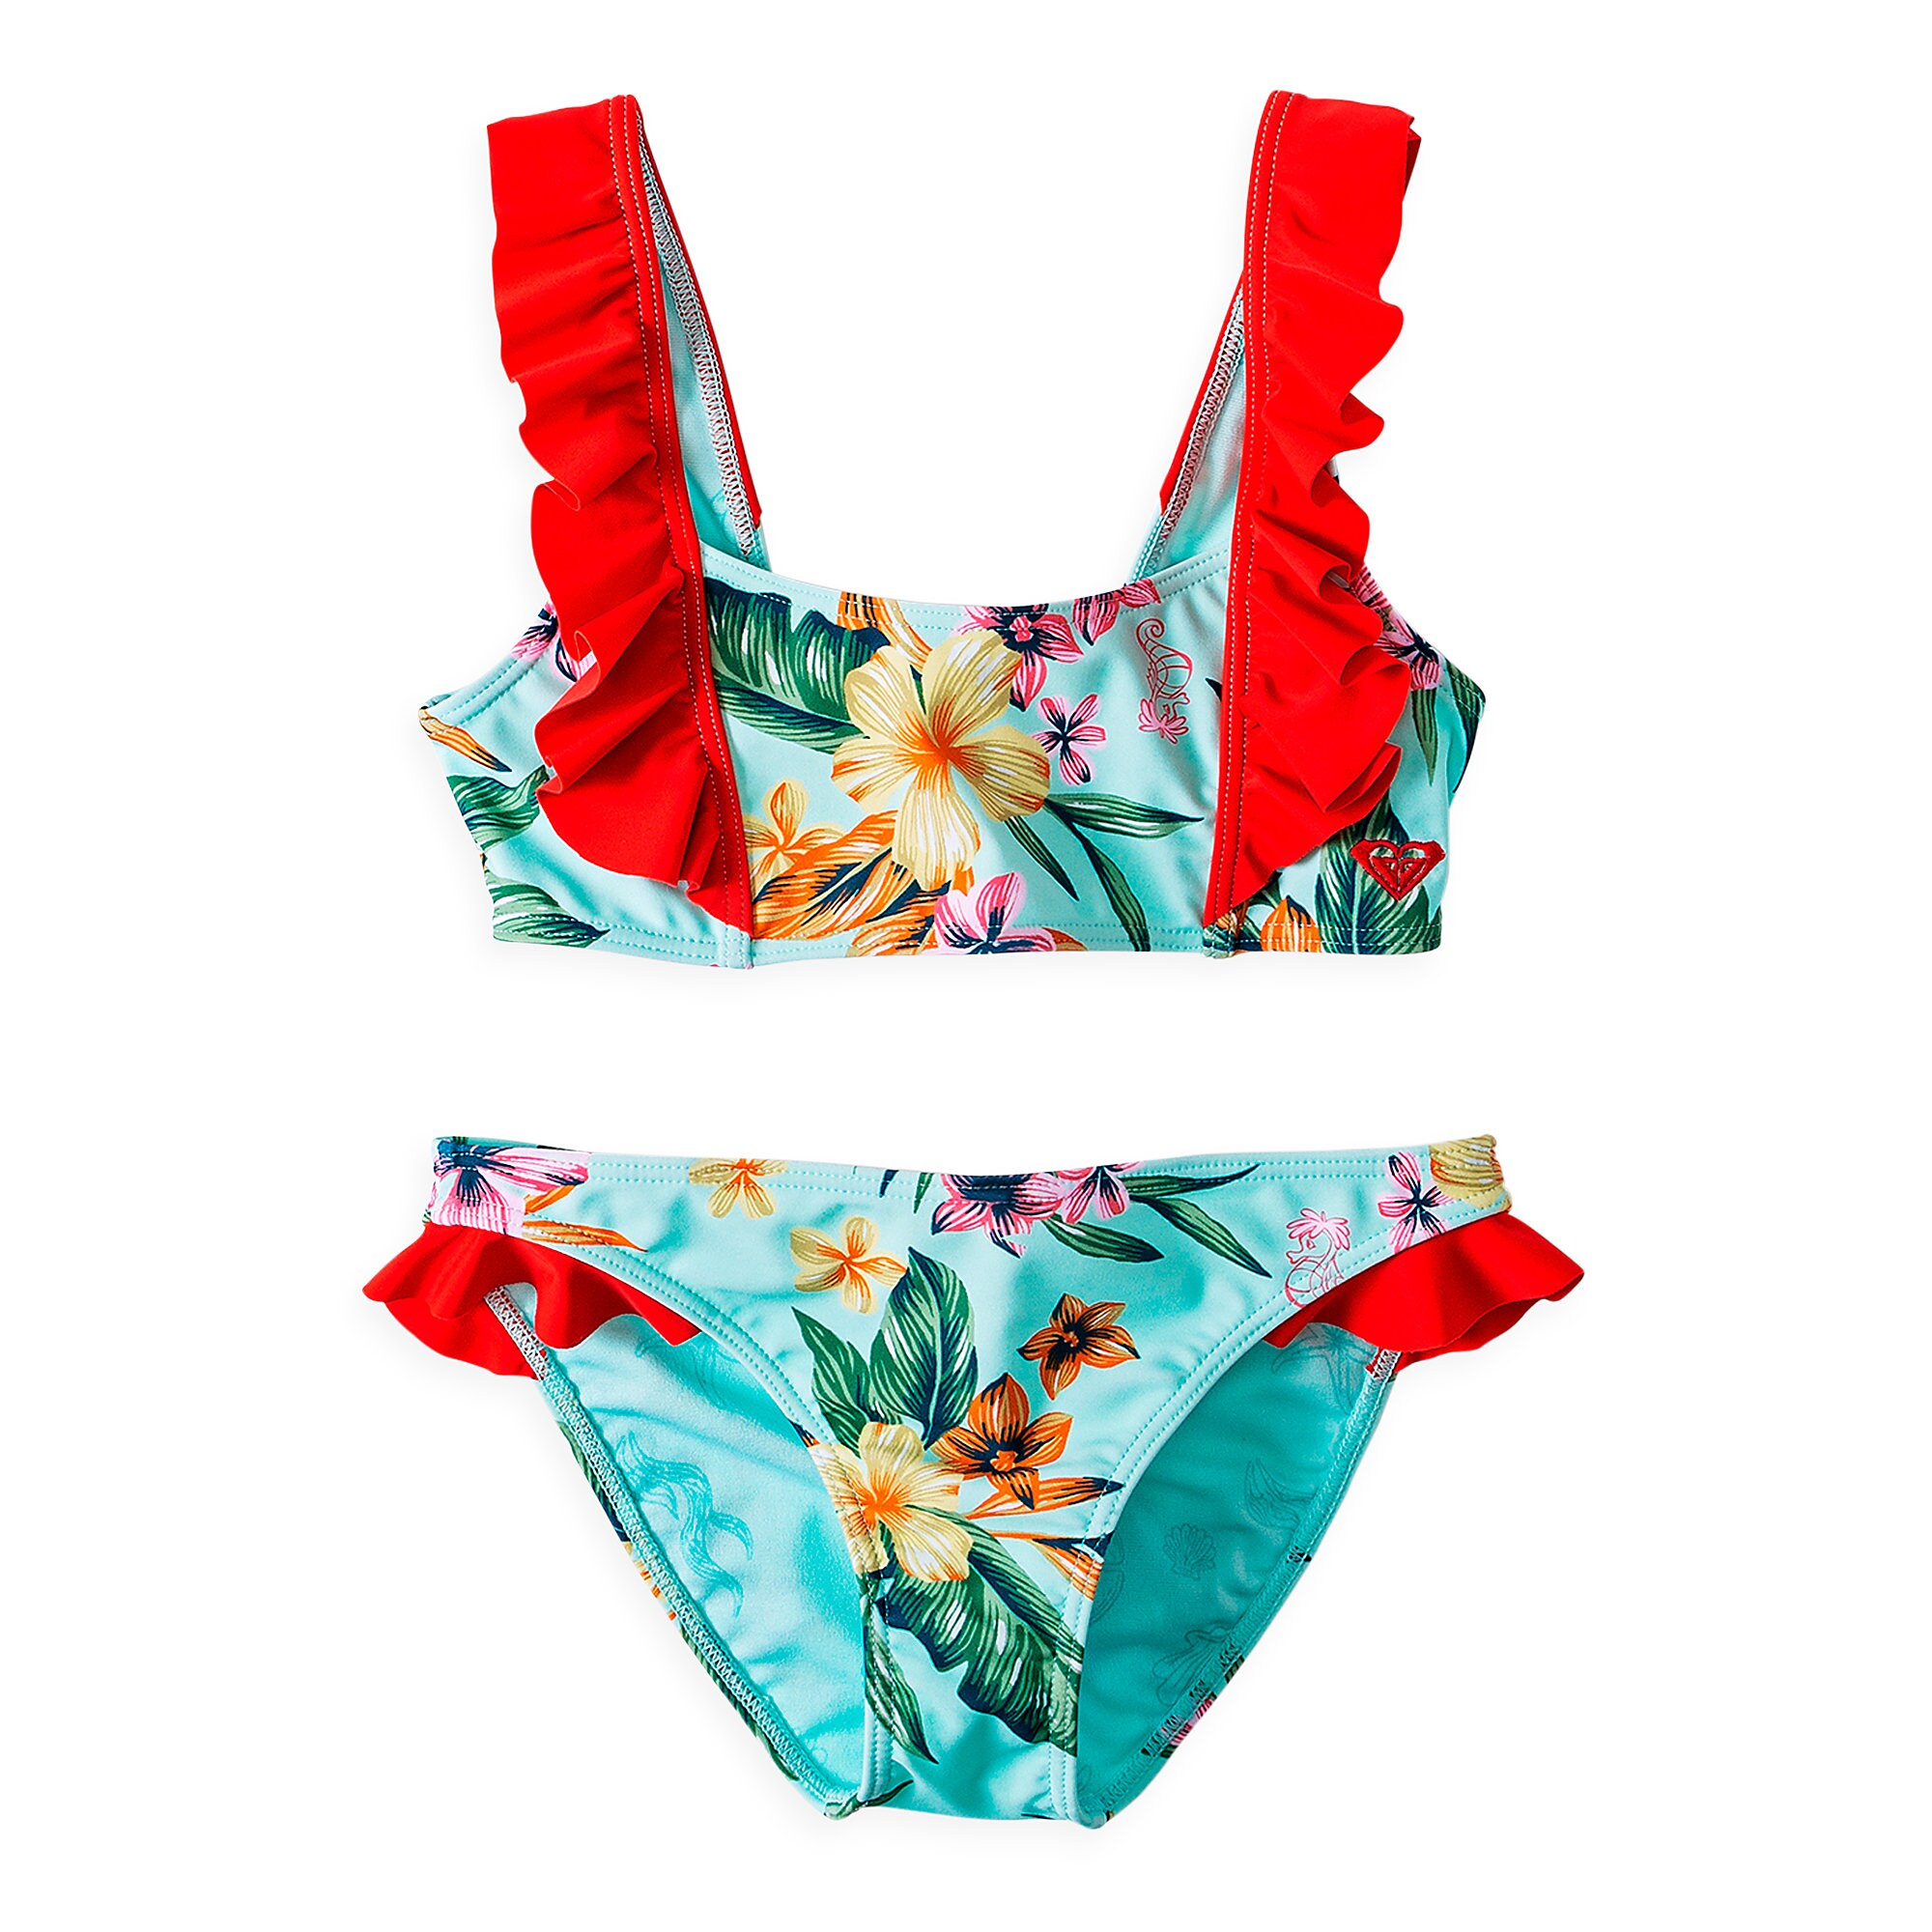 The Little Mermaid Floral Swimsuit for Girls by ROXY Girl